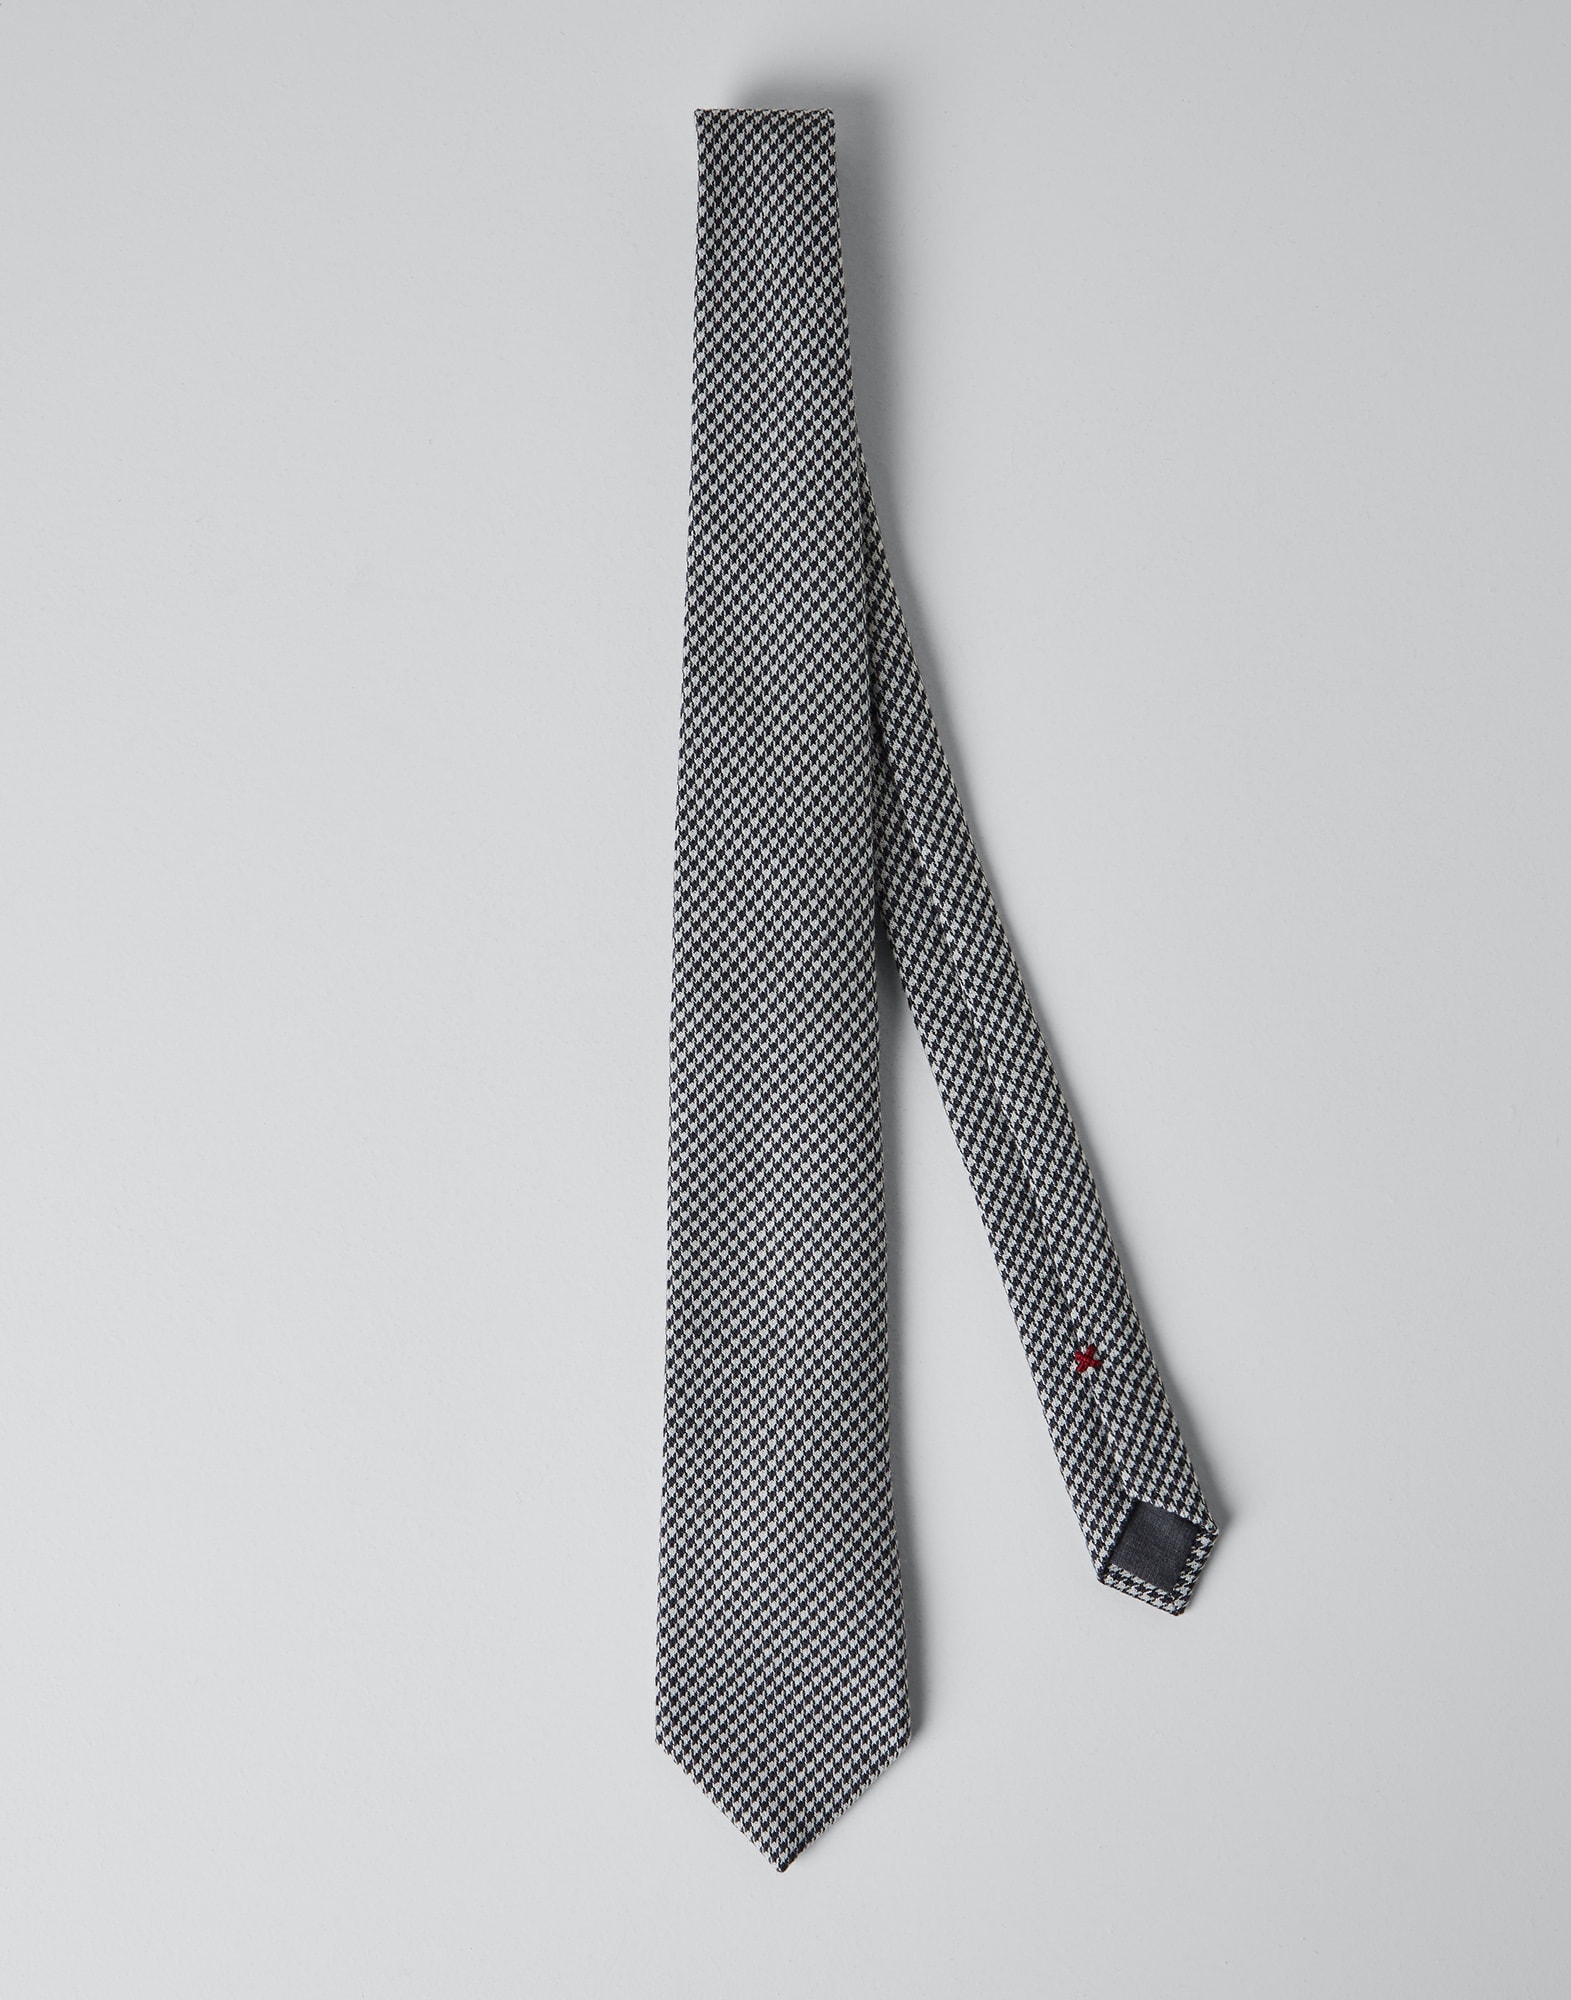 Wool and silk houndstooth tie